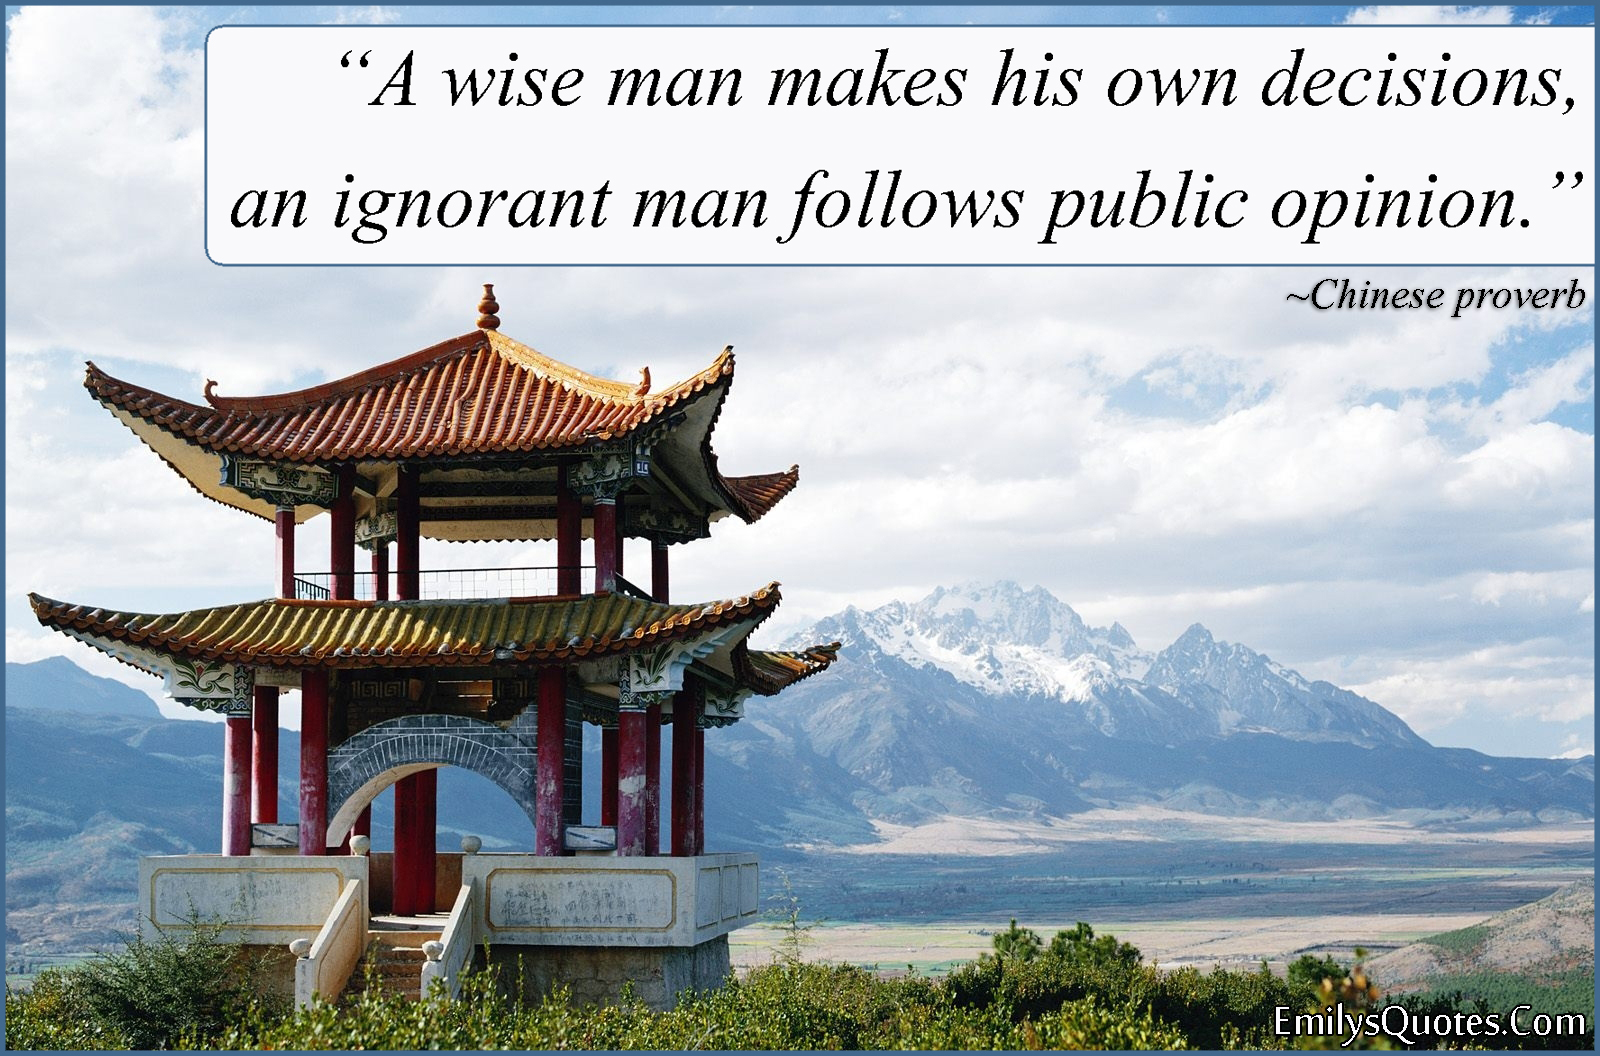 A wise man makes his own decisions, an ignorant man follows public opinion